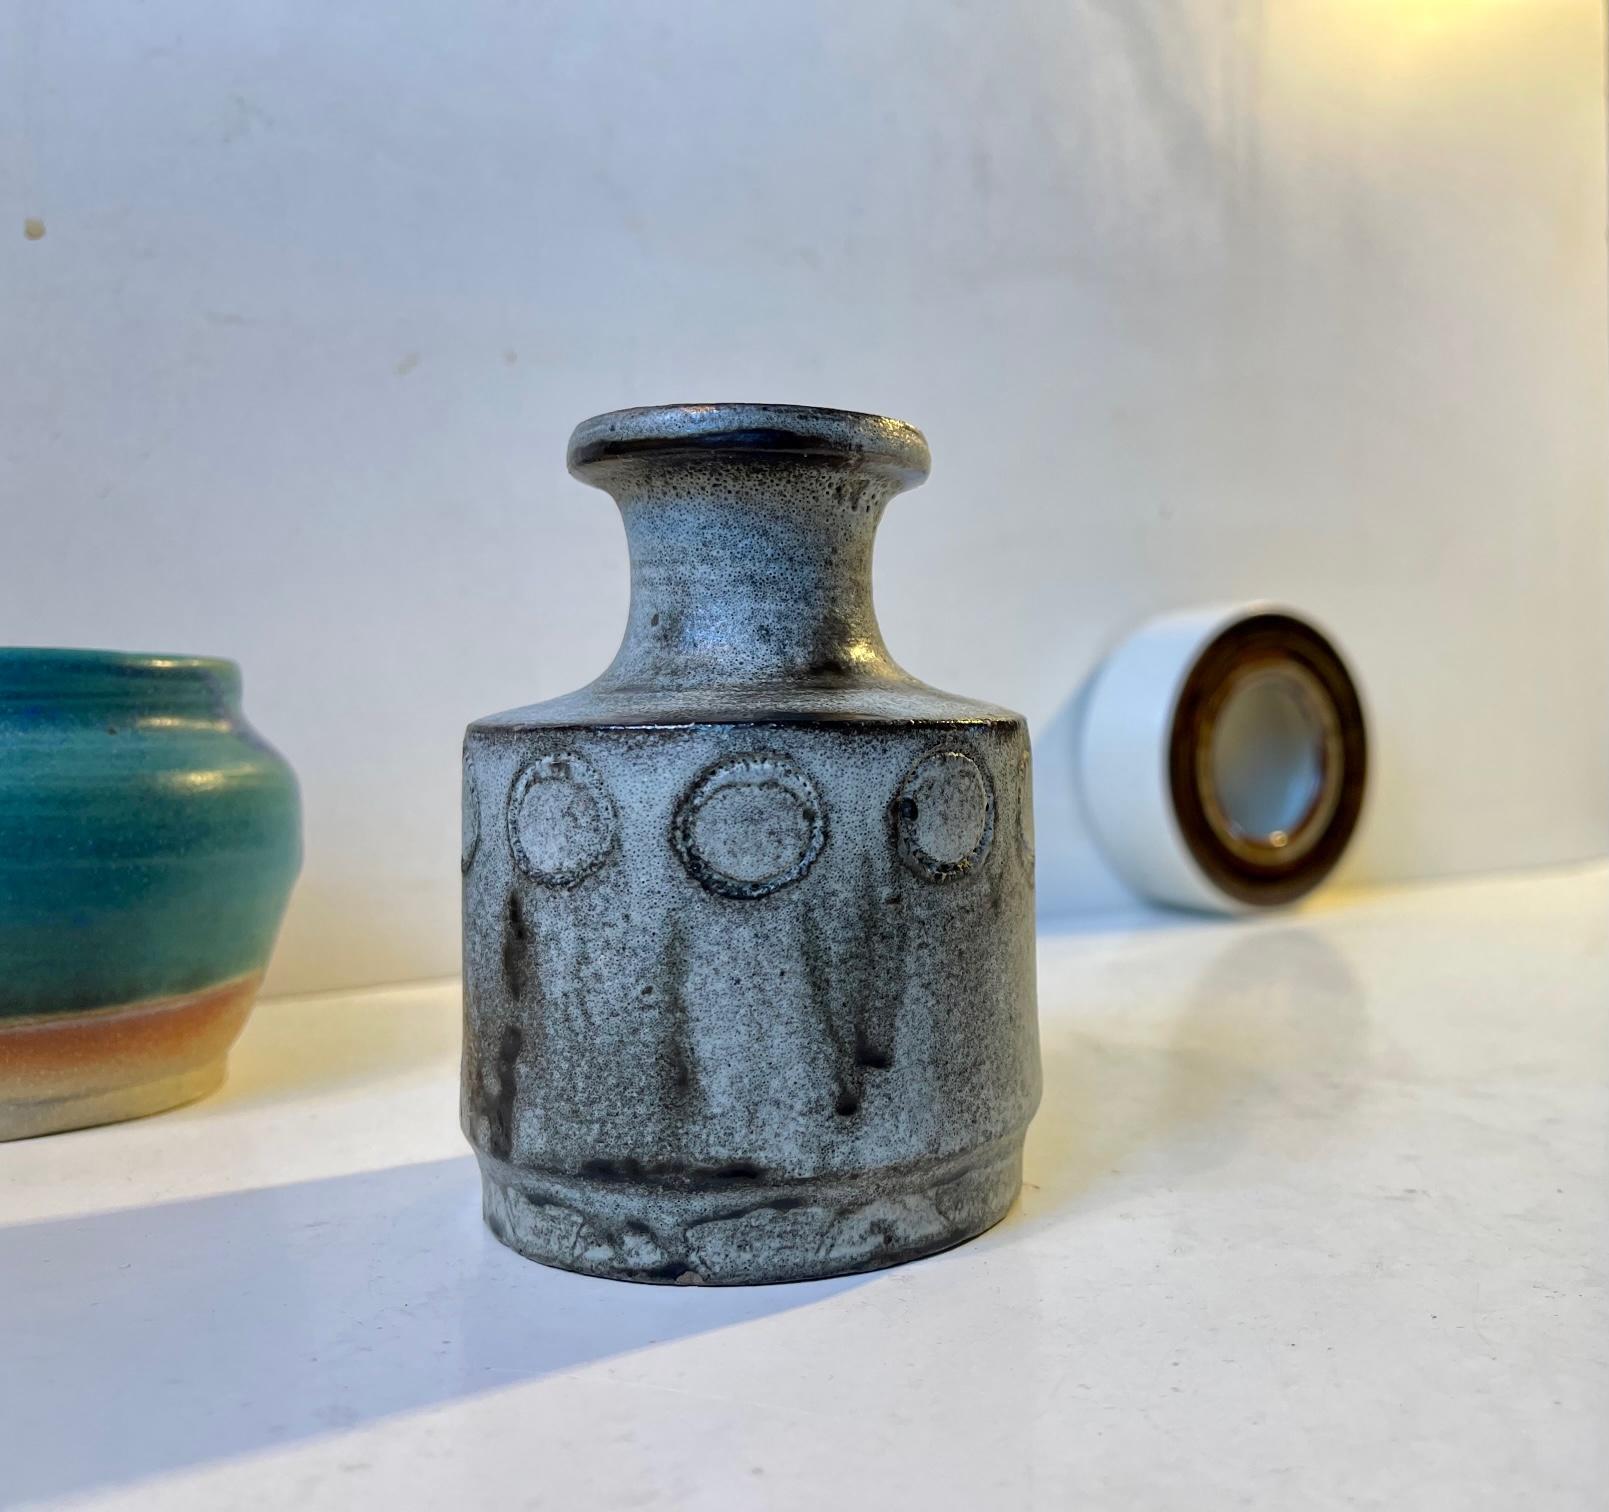 Mixed/curated group of 3 Scandinavian ceramic/stoneware pieces. Number one with a dusty blue/green turquoise glaze, a Hammershoi inspired vase with ash-based glaze and a small cylindrical vessel/dish with earthy striped glazes. All studio made in